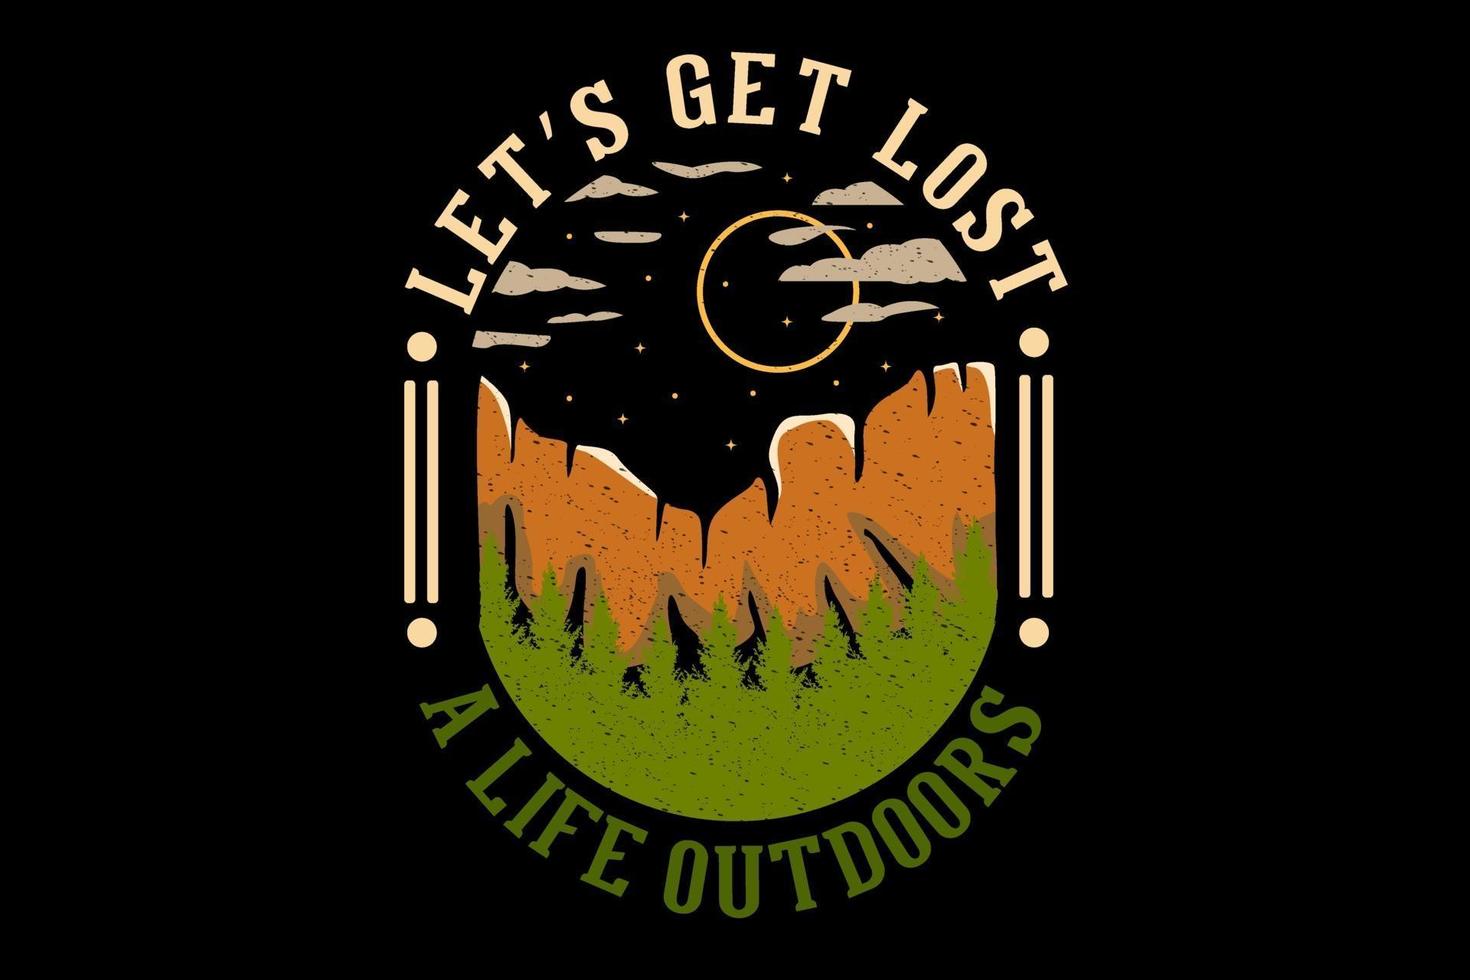 let's get lost a life outdoors hand drawn design vector